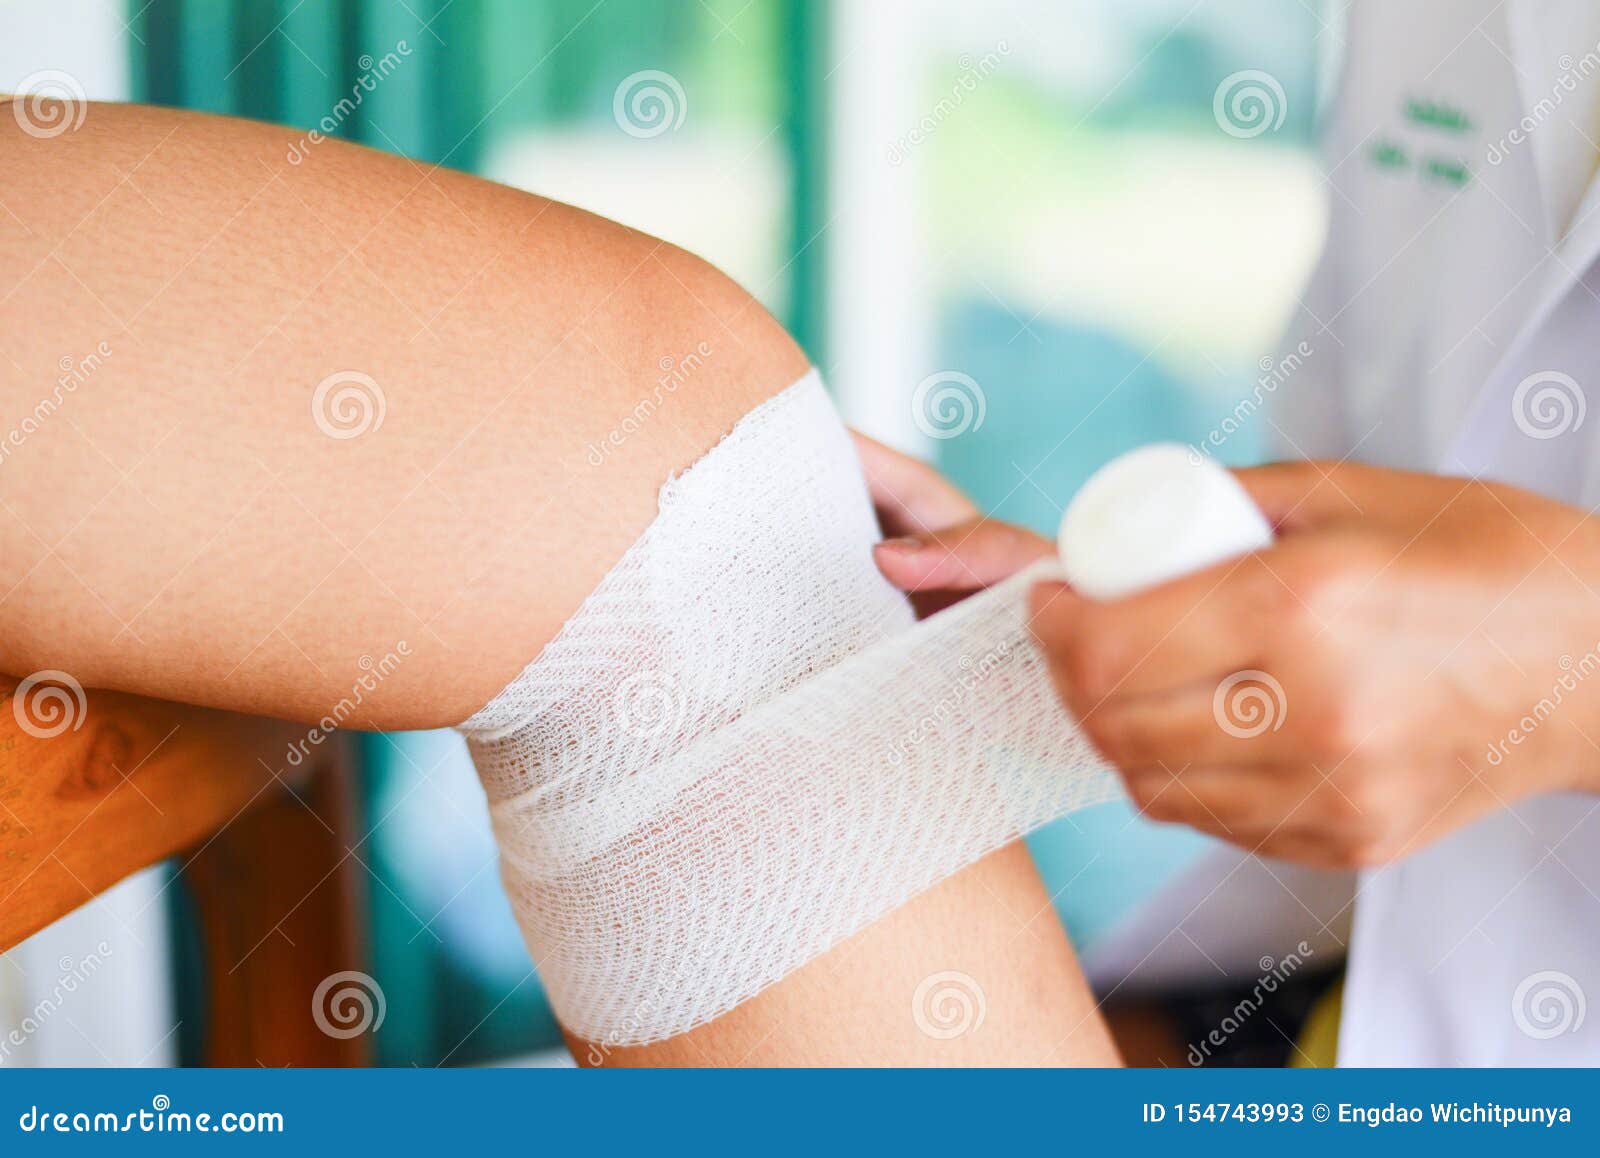 wound bandaging an injured knee from fall by nurse - first aid leg injury health care and medicine concept